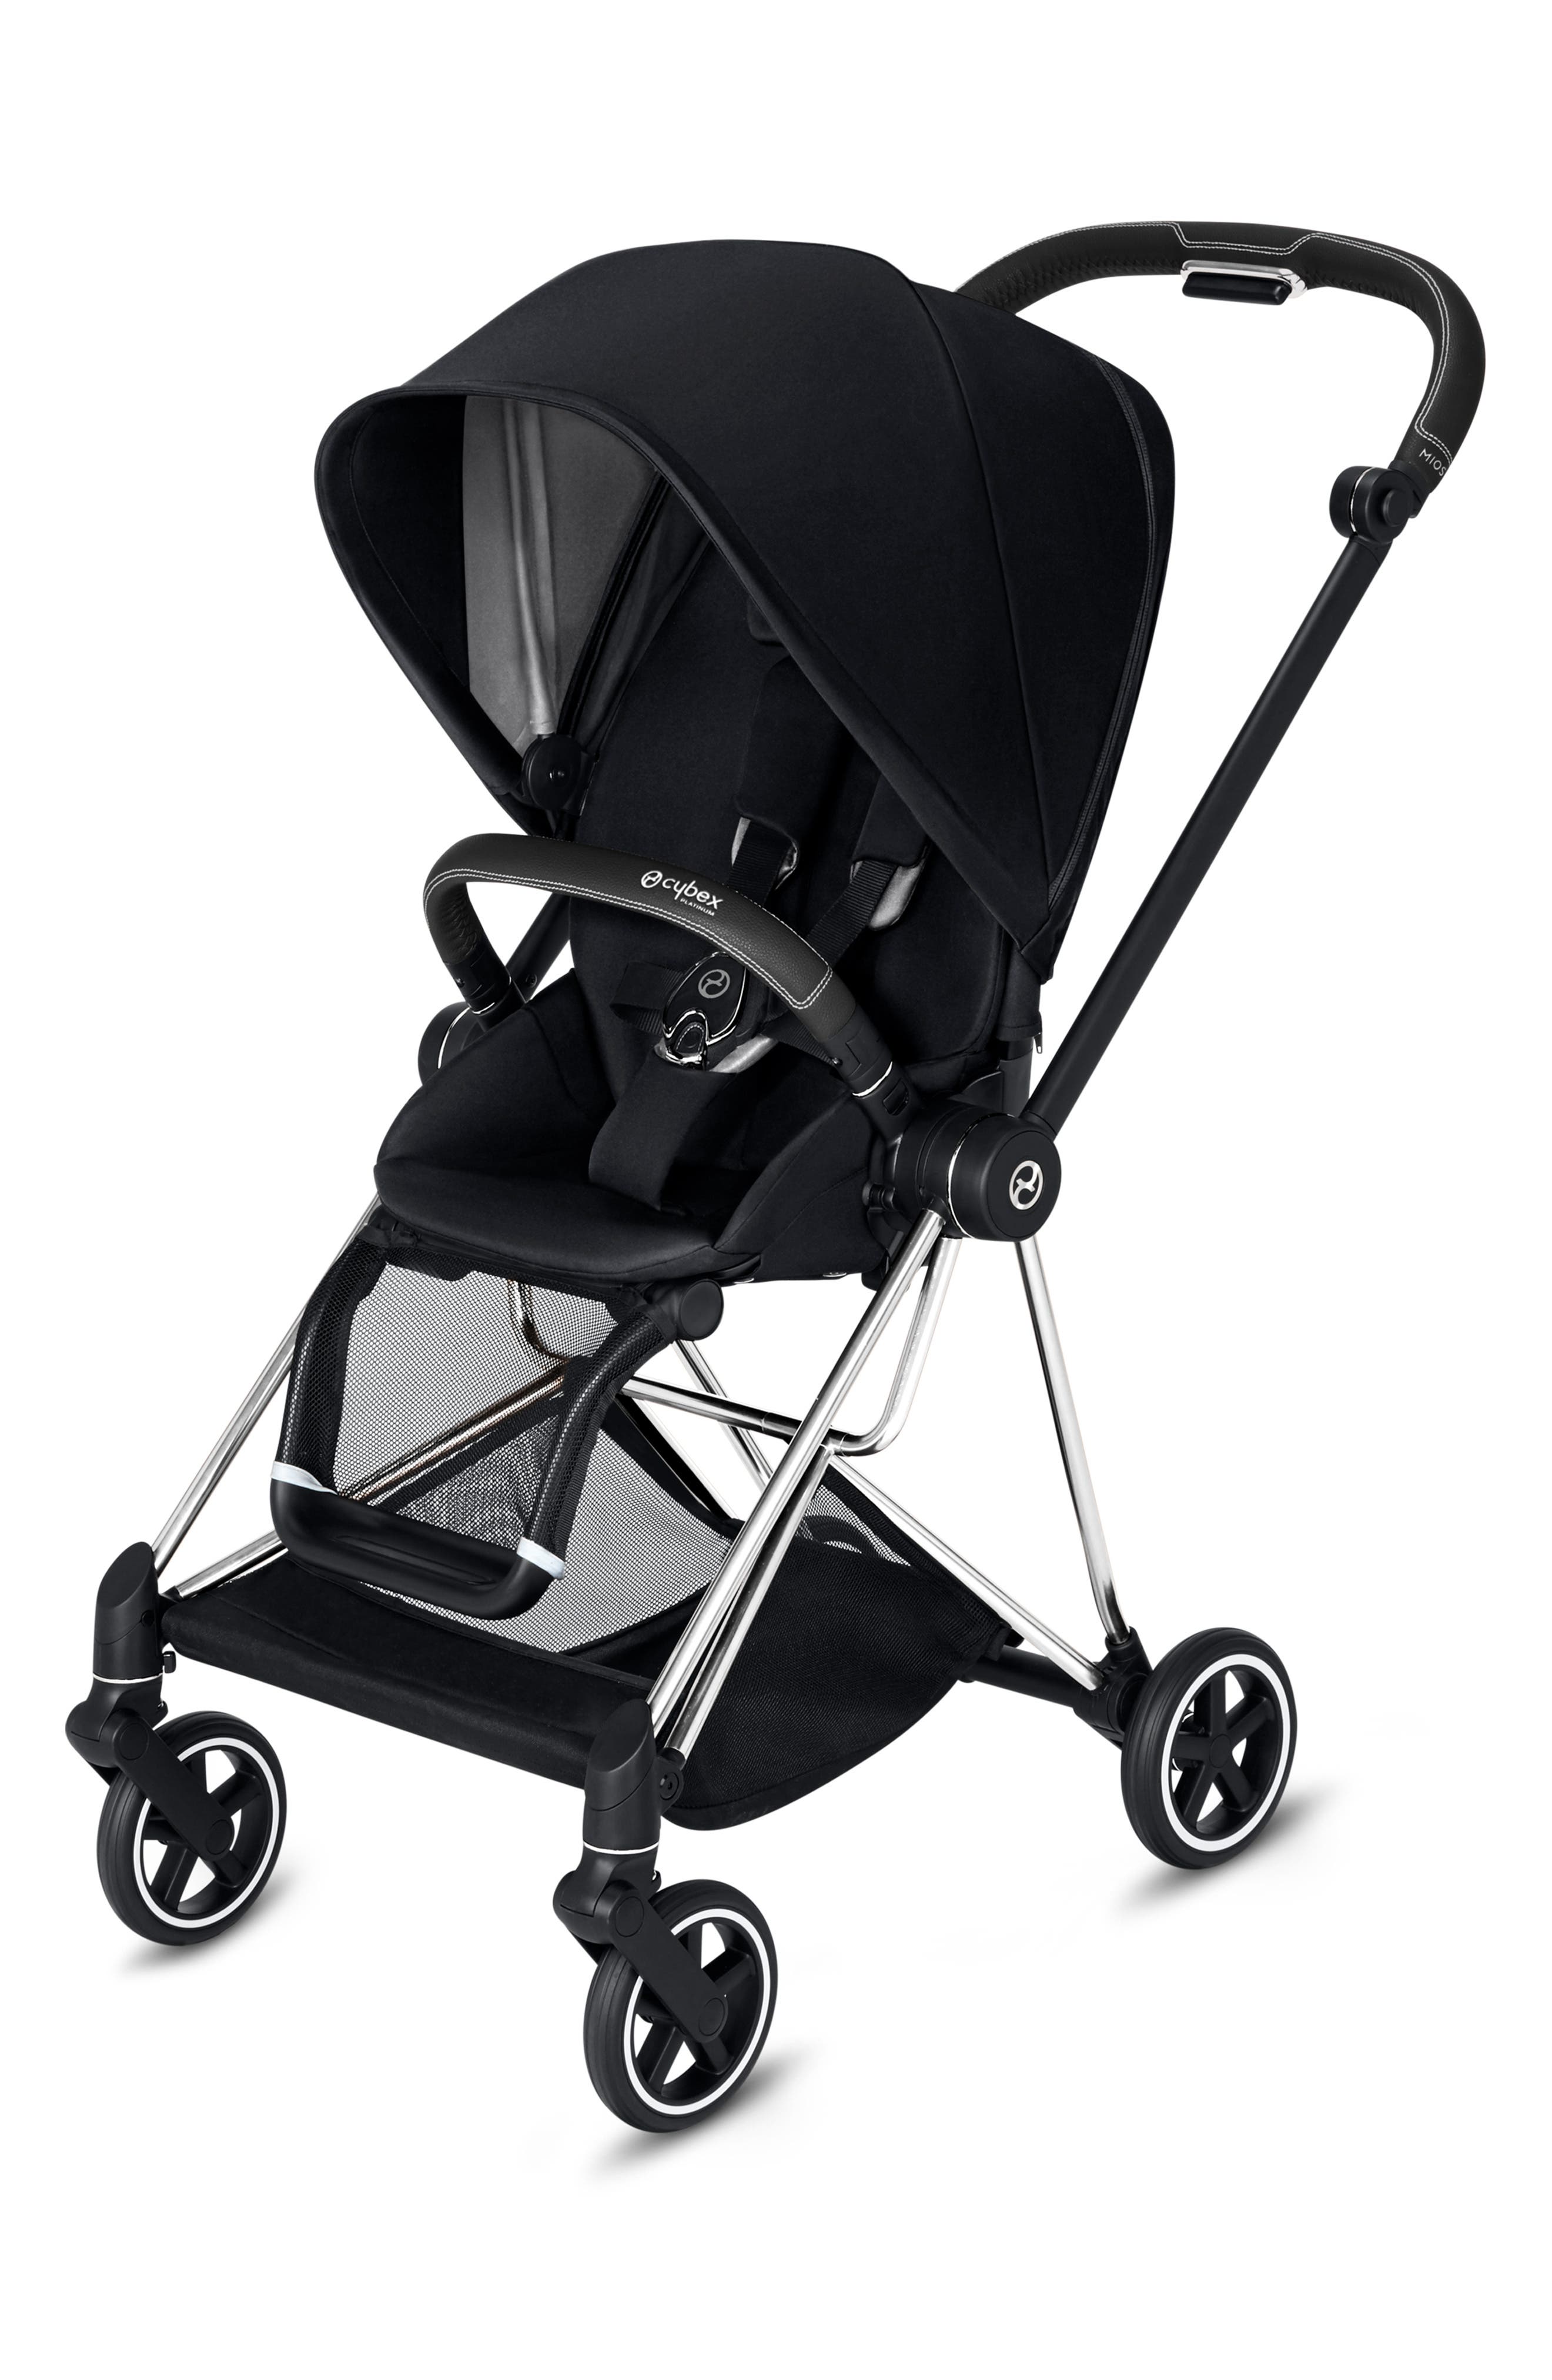 the compact stroller